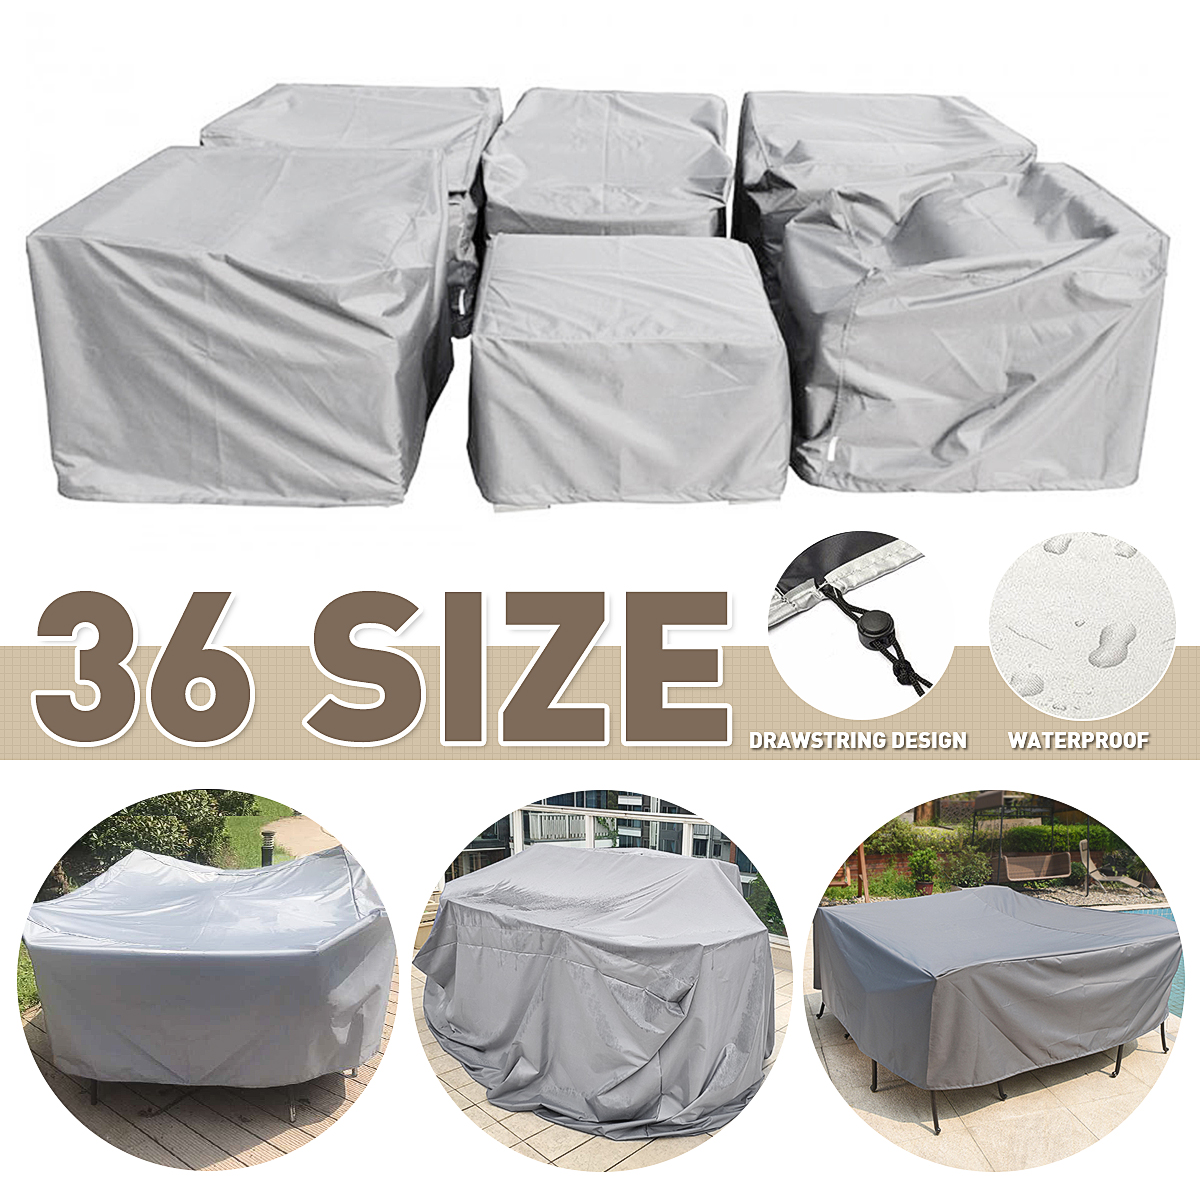 20Size Waterproof Outdoor Patio Garden Furniture Covers Rain Snow Chair covers for Sofa Table Chair Dust Proof Protective Case